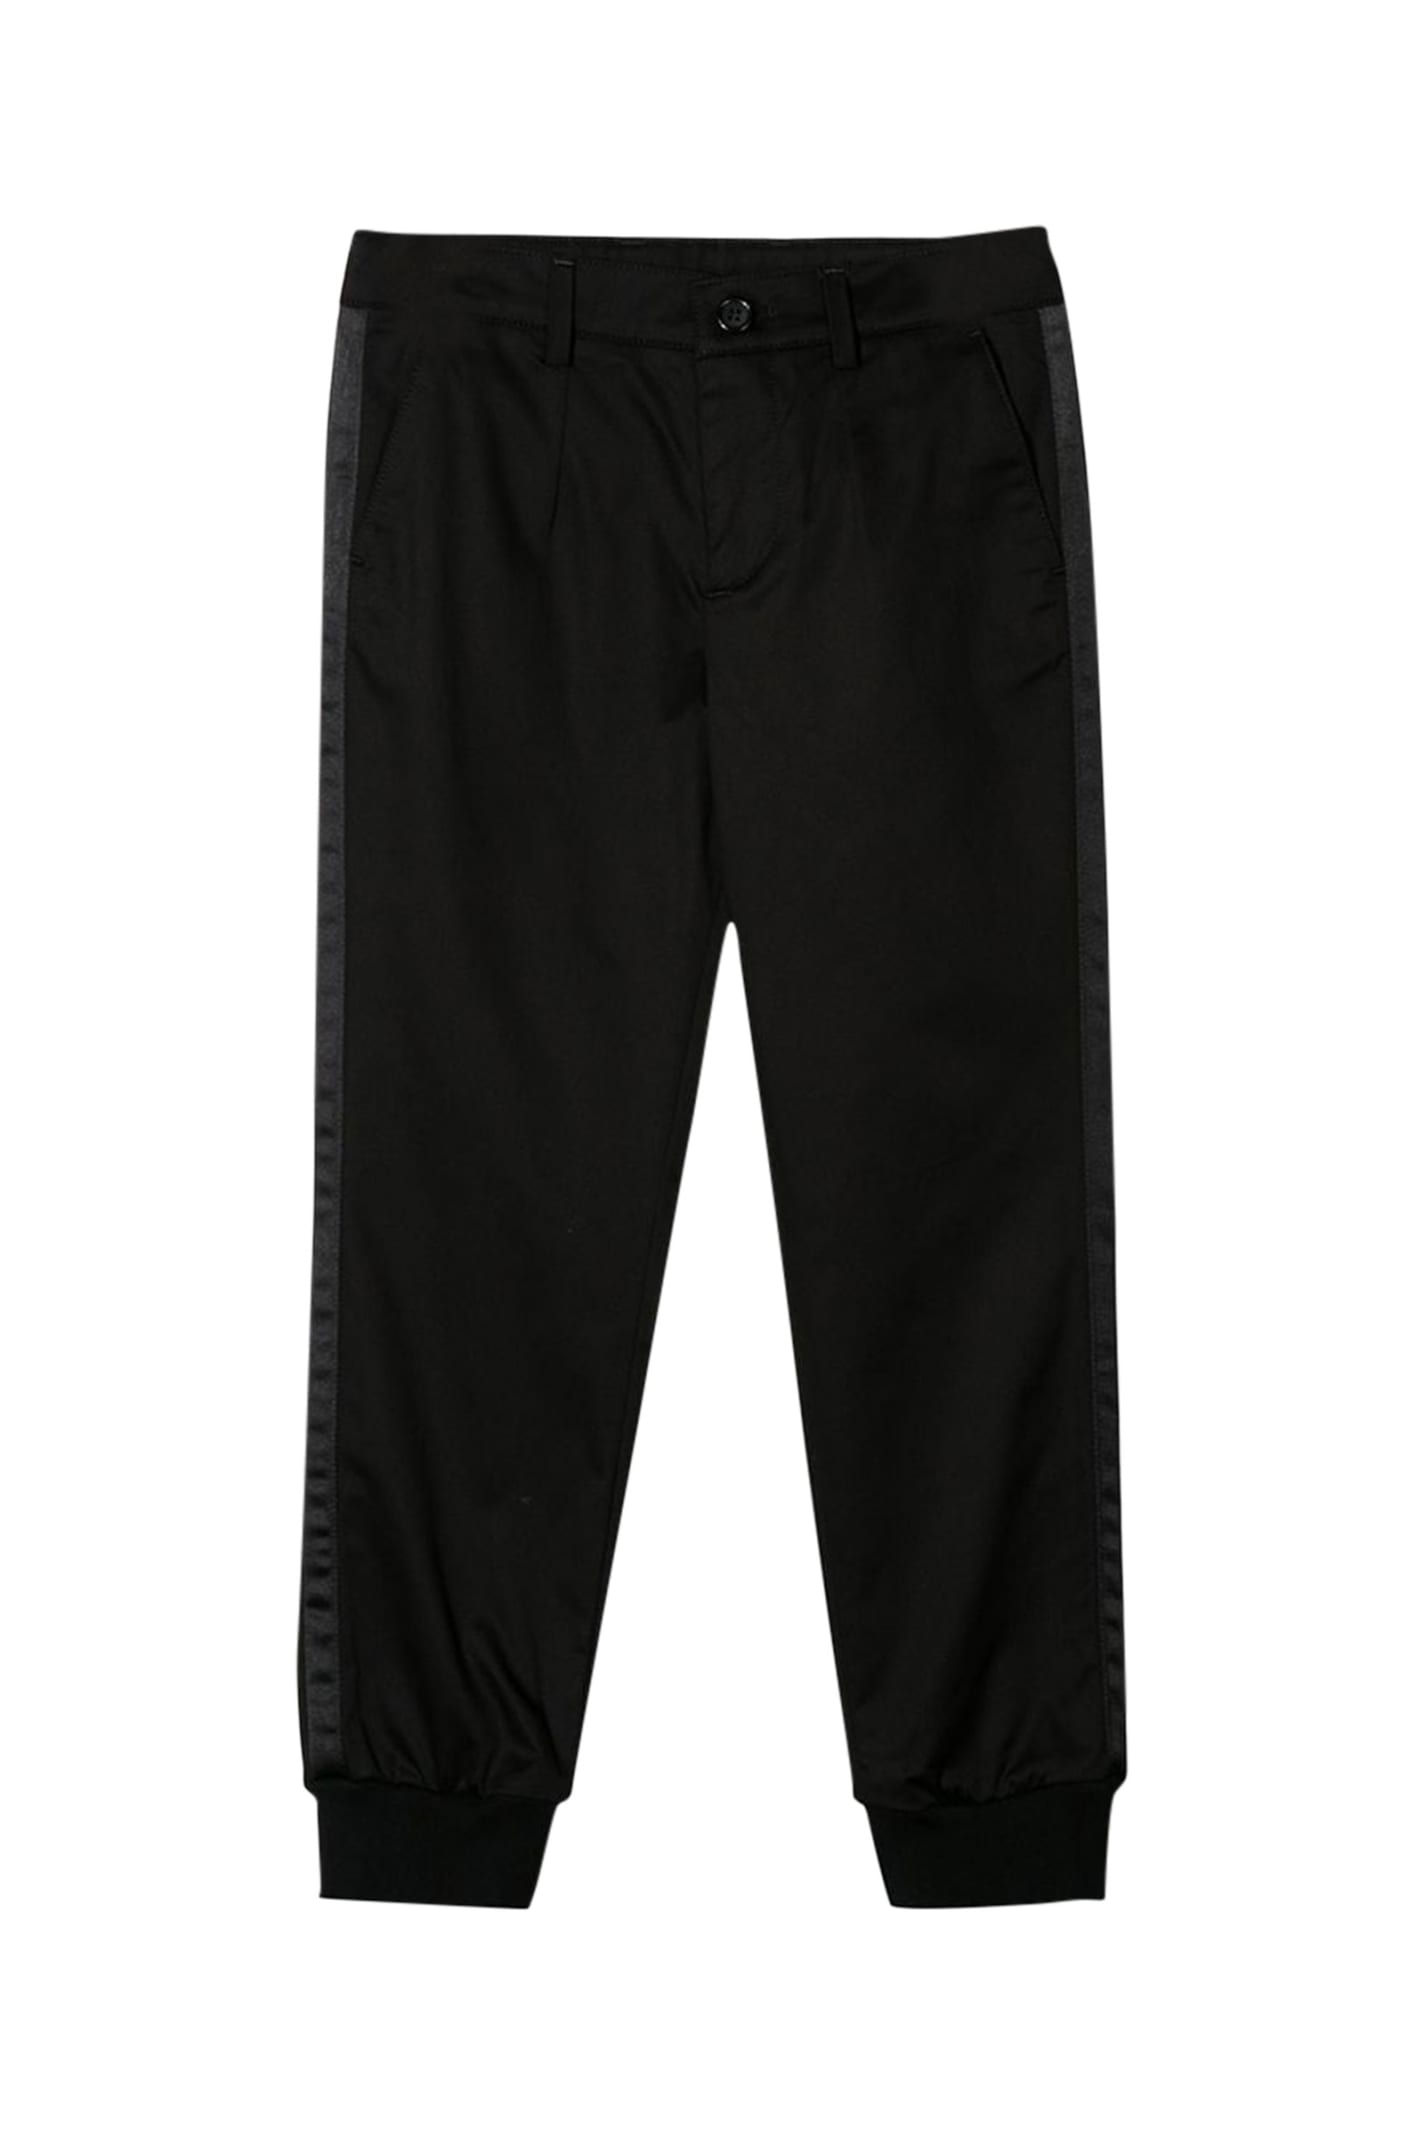 DOLCE & GABBANA TROUSERS WITH SIDE BAND,11263292